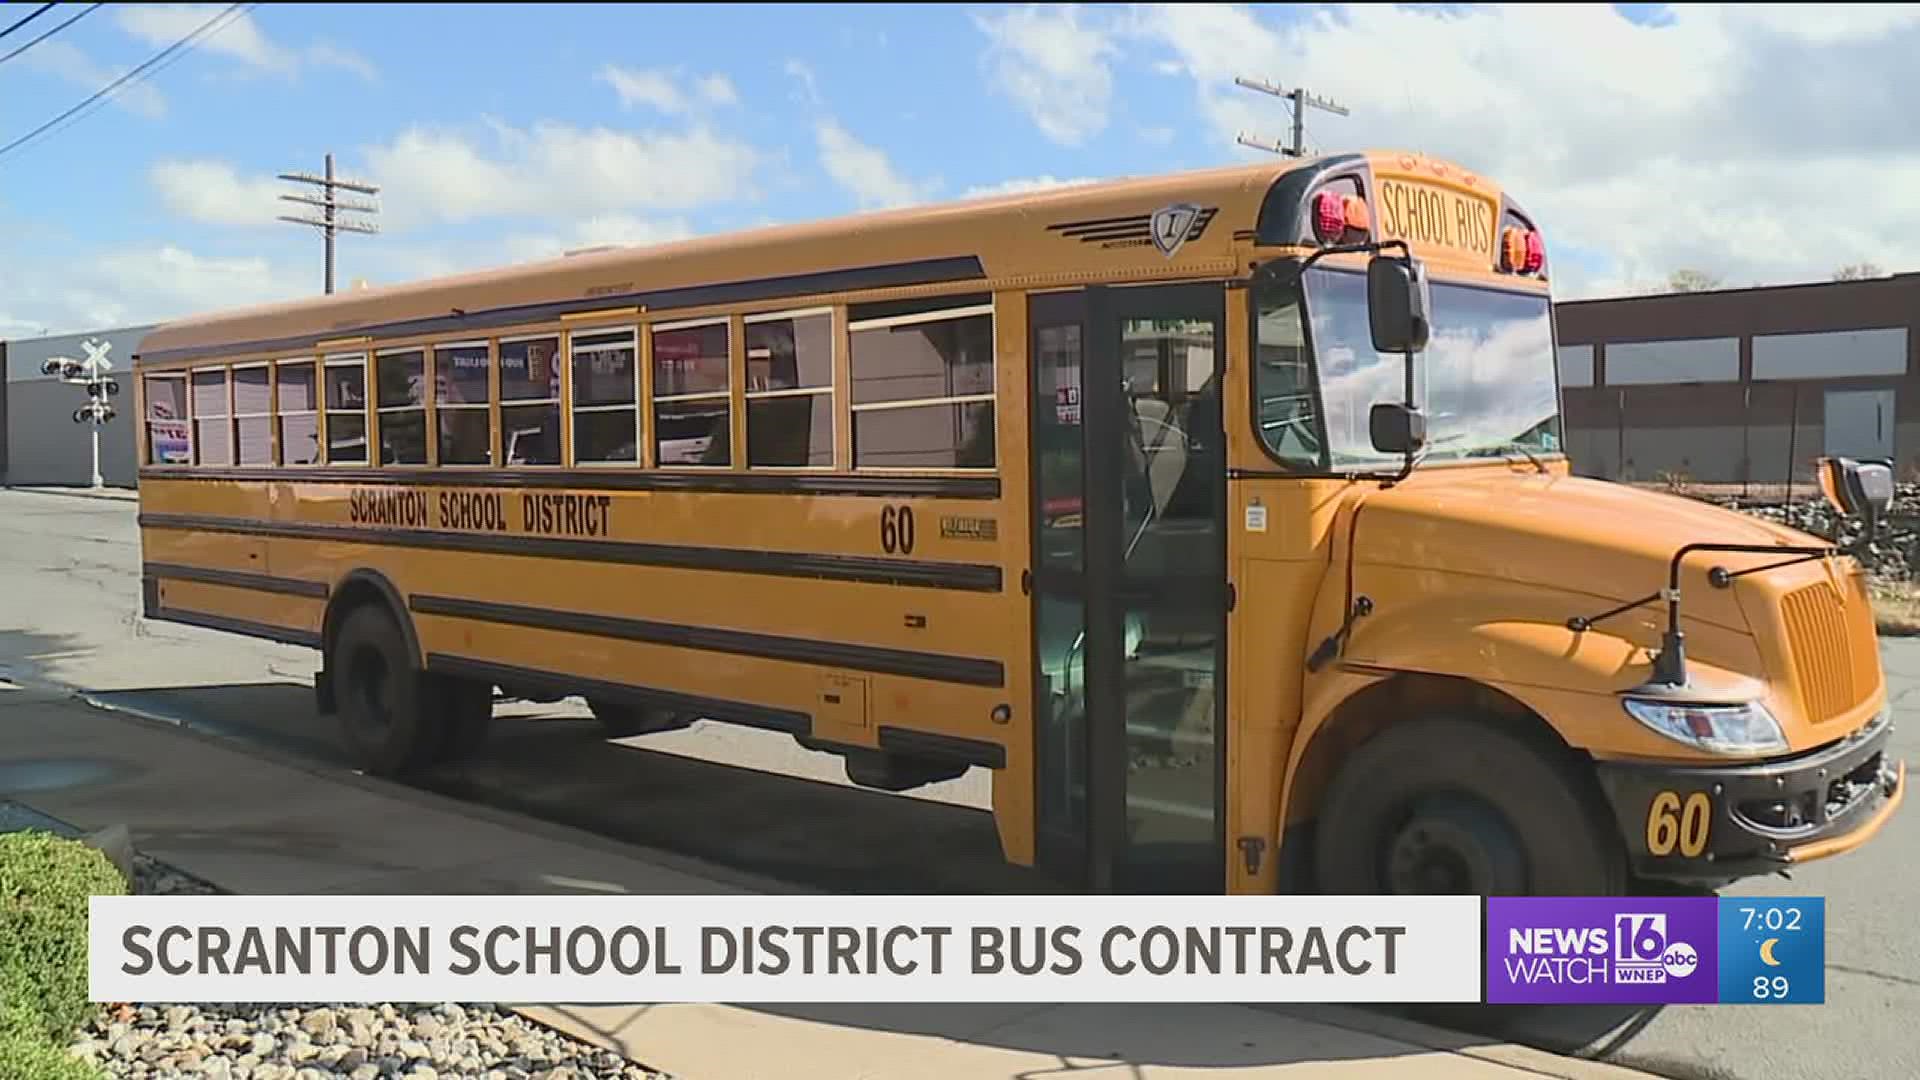 The busing contract is part of the district's financial recovery plan with the state.